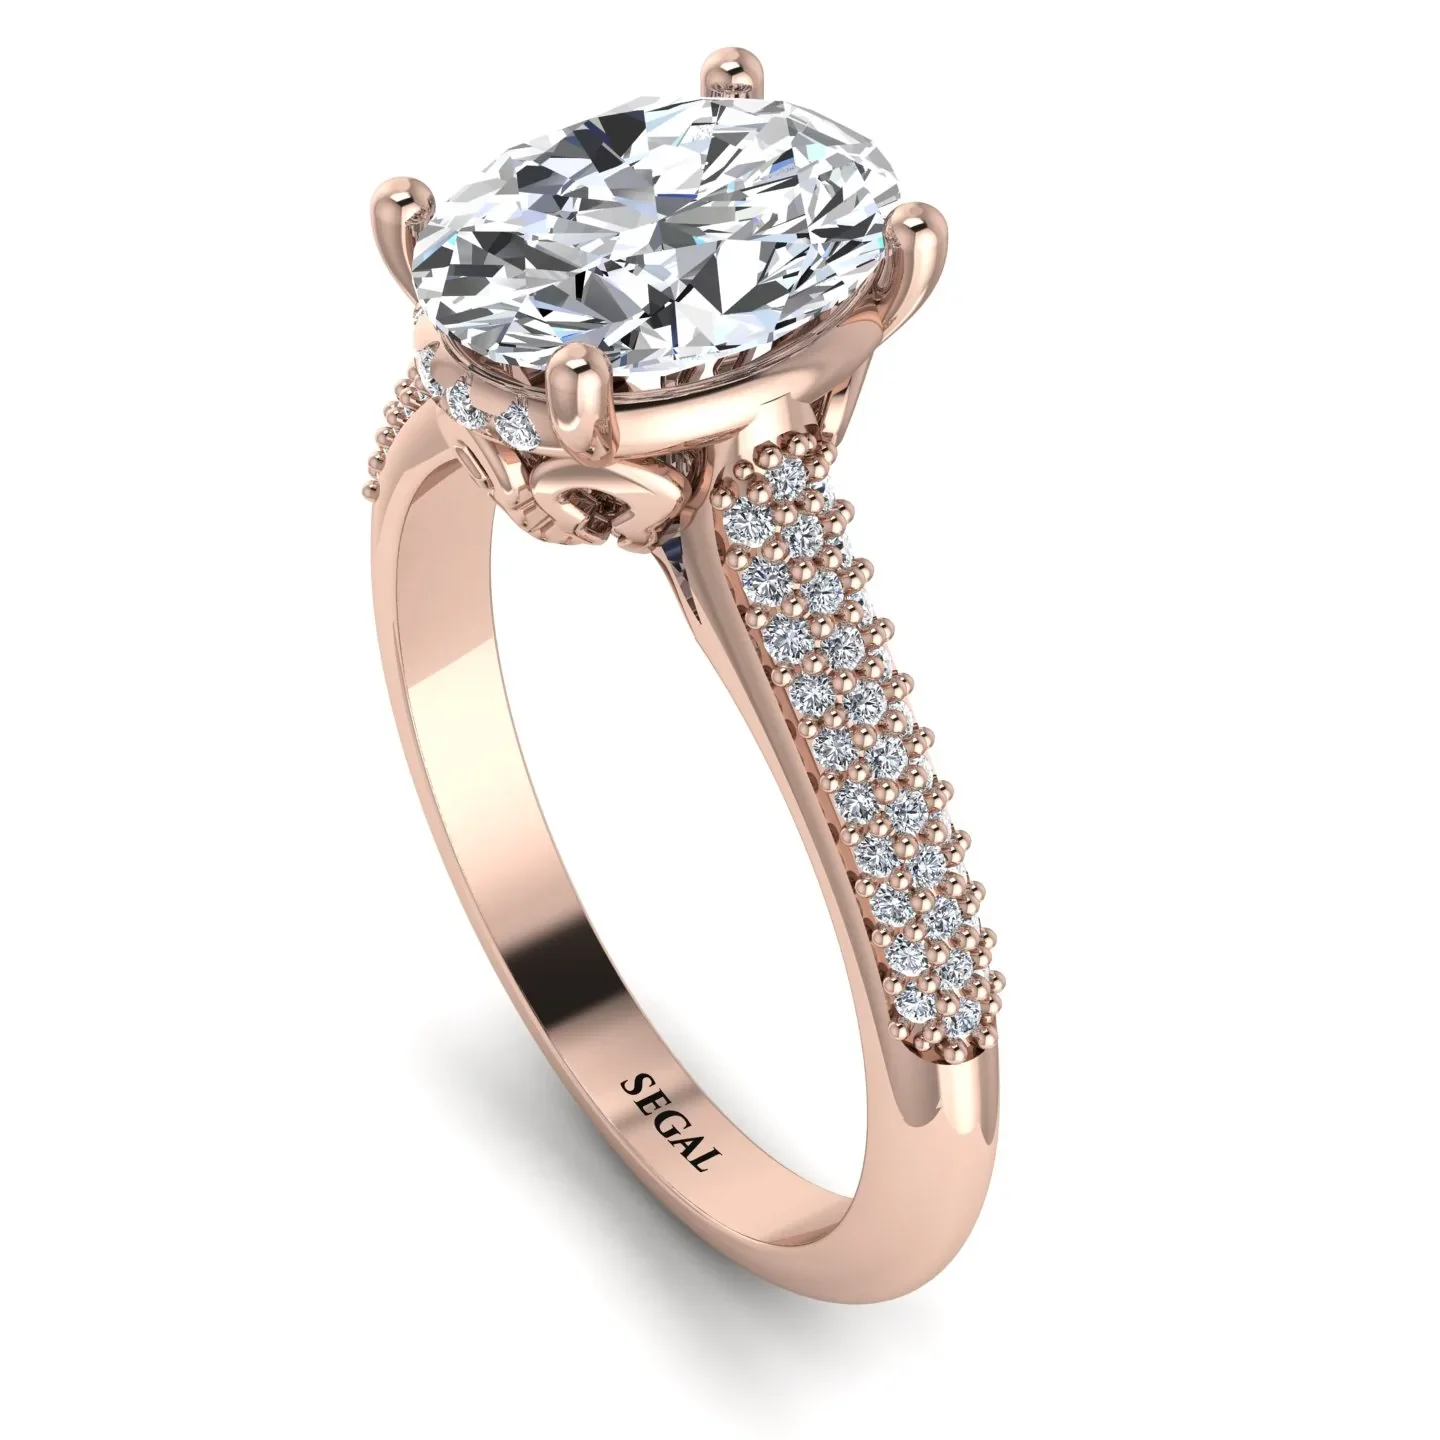 Image of Luxury Pave Oval Cut Diamond Engagement Ring With Hidden Stone - Ophelia No. 2